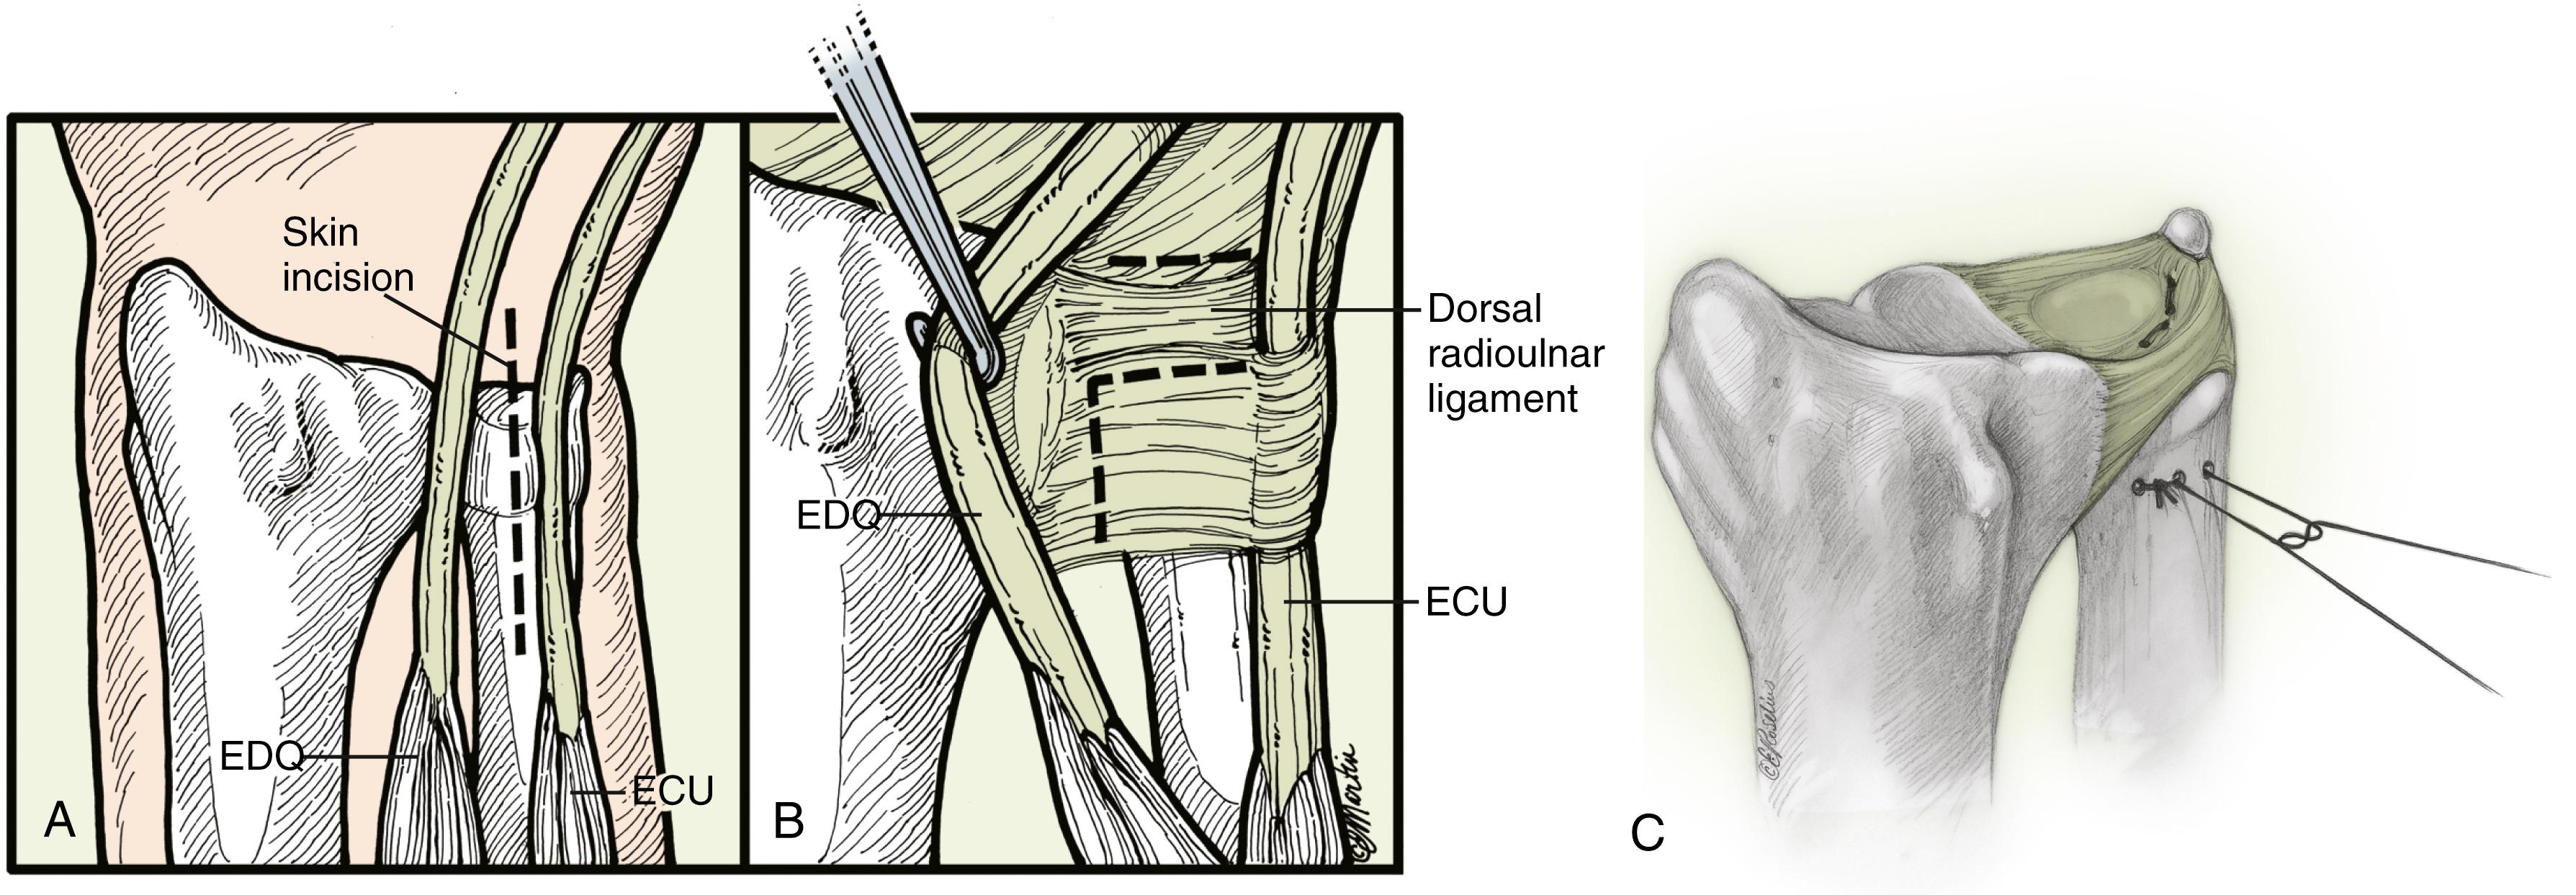 Fig. 14.16, A to C, Open repair of class IB tear is performed through a dorsal approach, “L”-shaped capsulotomy, and horizontal transosseous mattress sutures through the ulnar neck. ECU, Extensor carpi ulnaris; EDM, extensor digiti minimi.